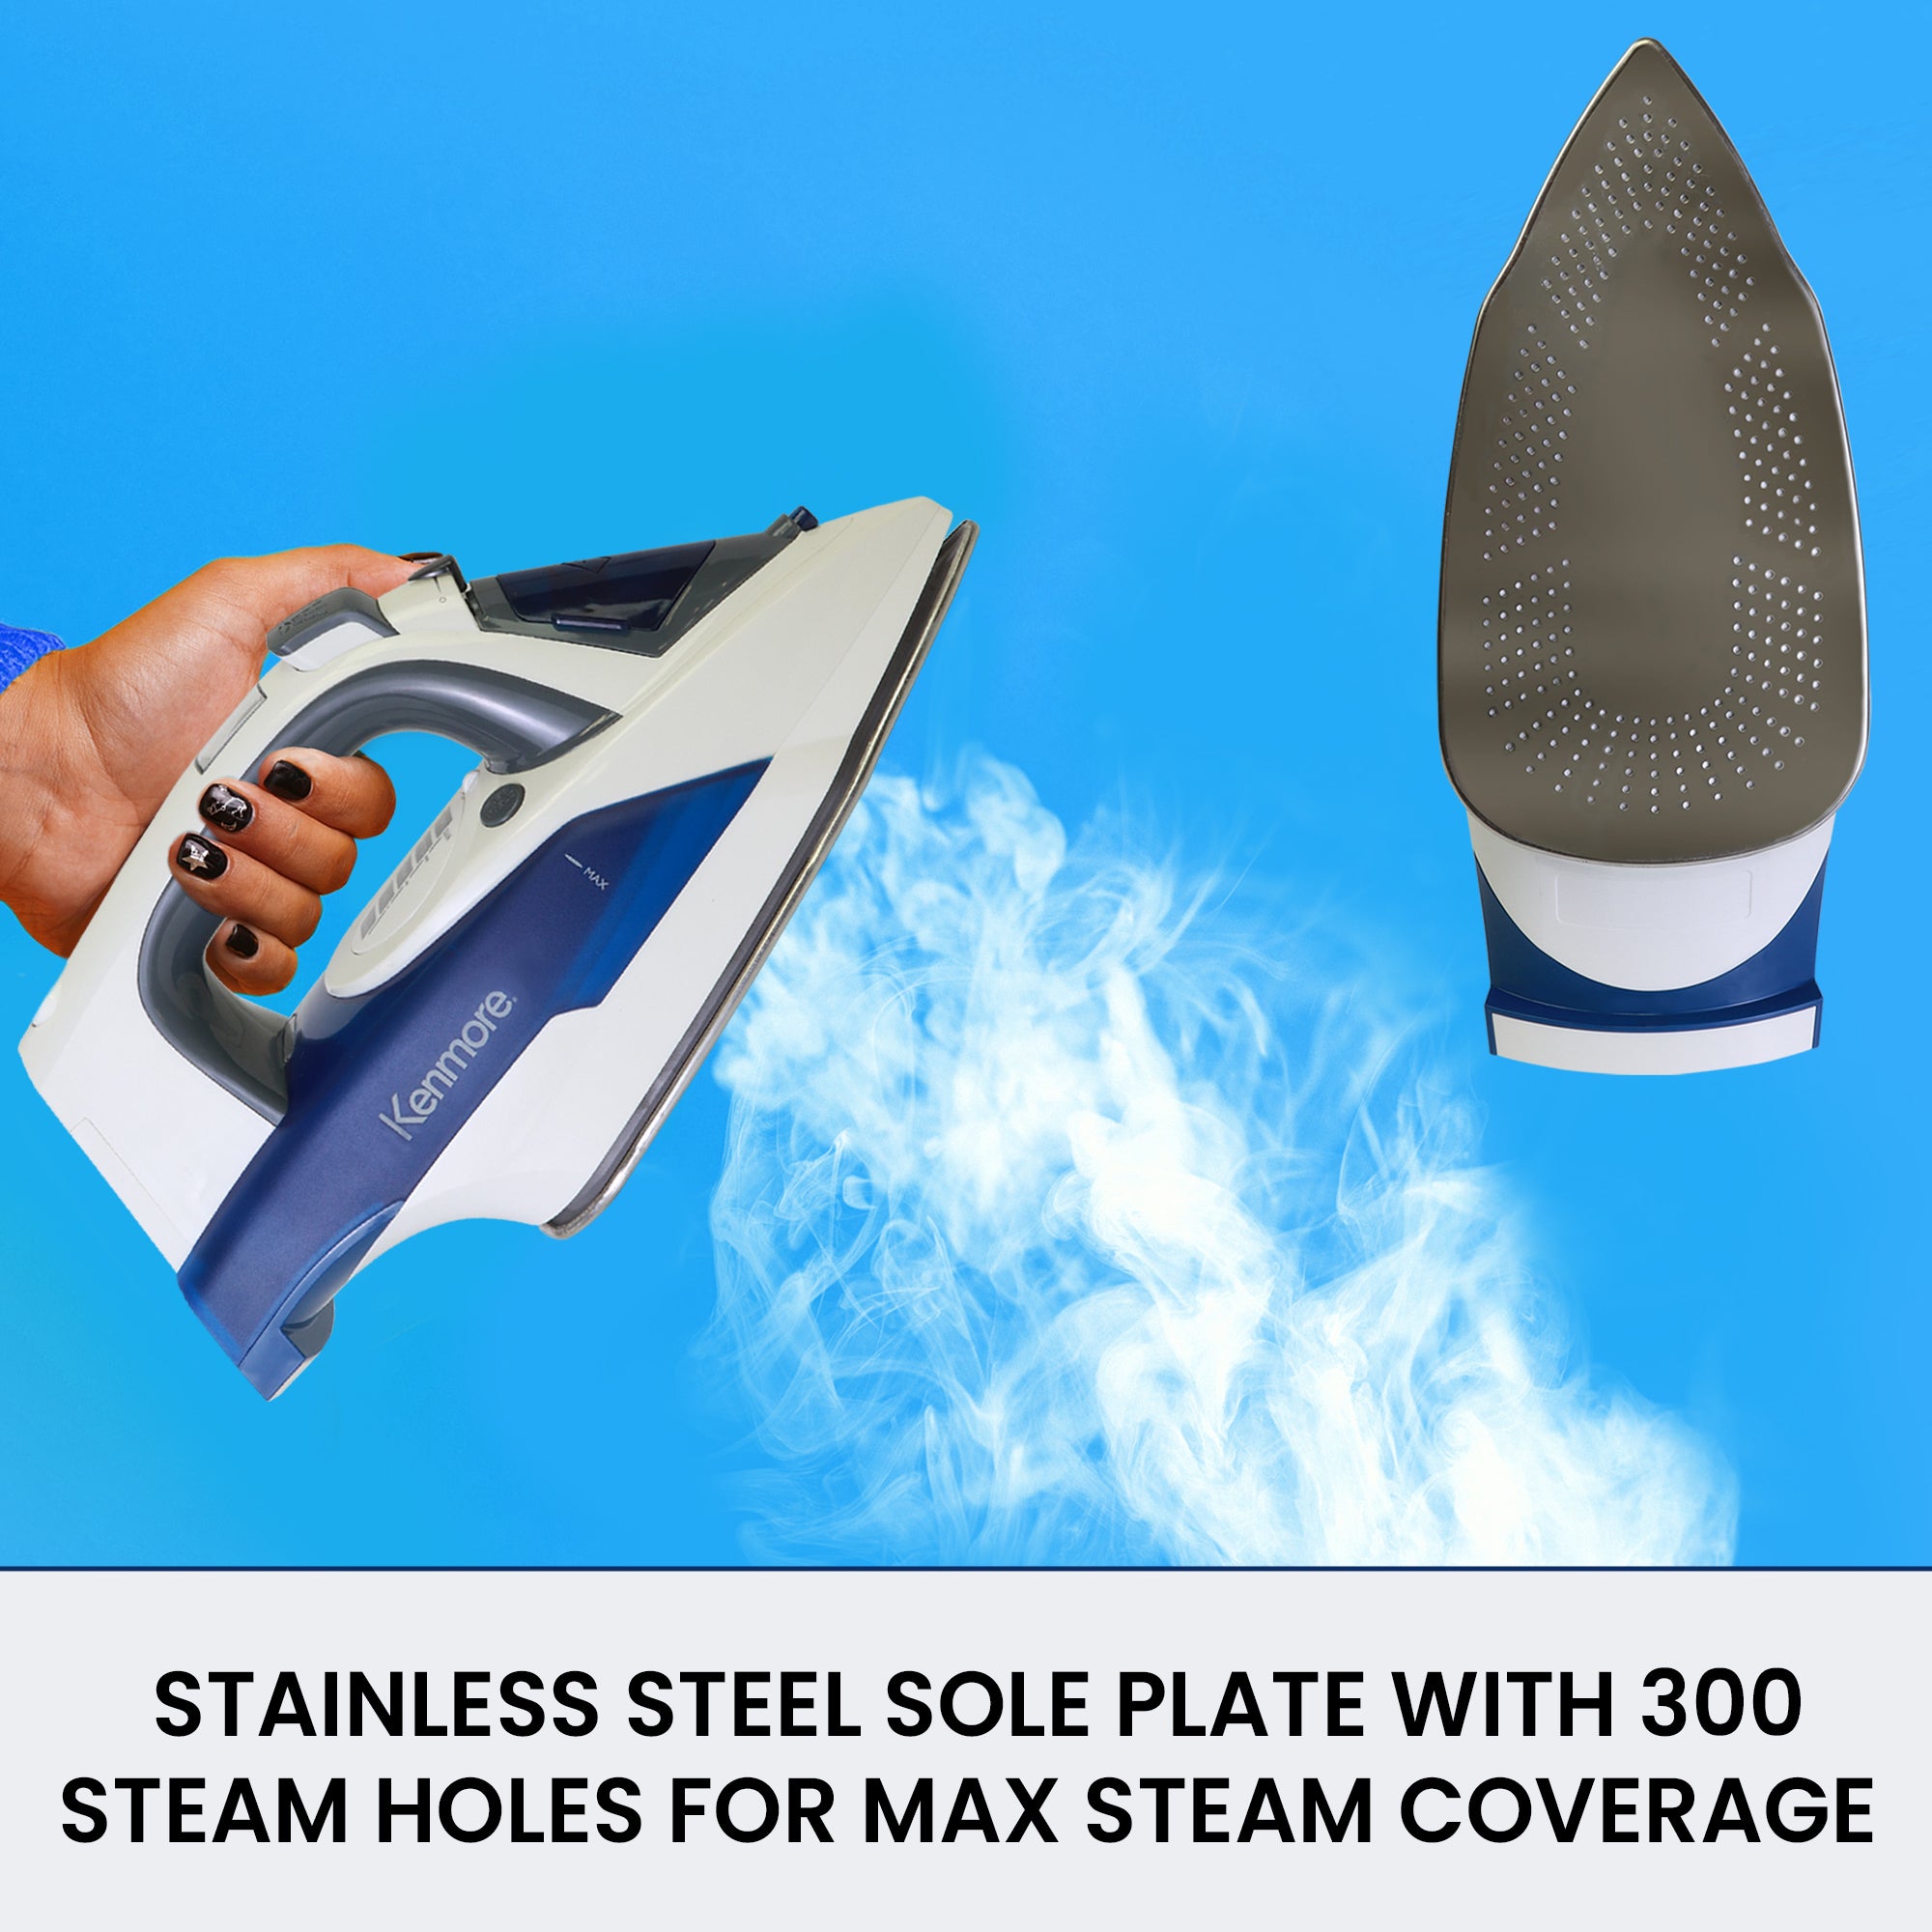 On the left is a person's hand holding the Kenmore digital power steam iron and pressing the burst of steam button and on the right is a view of the soleplate. Text below reads, "STAINLESS STEEL SOLE PLATE WITH 300+ STEAM HOLES FOR MAX STEAM COVERAGE"